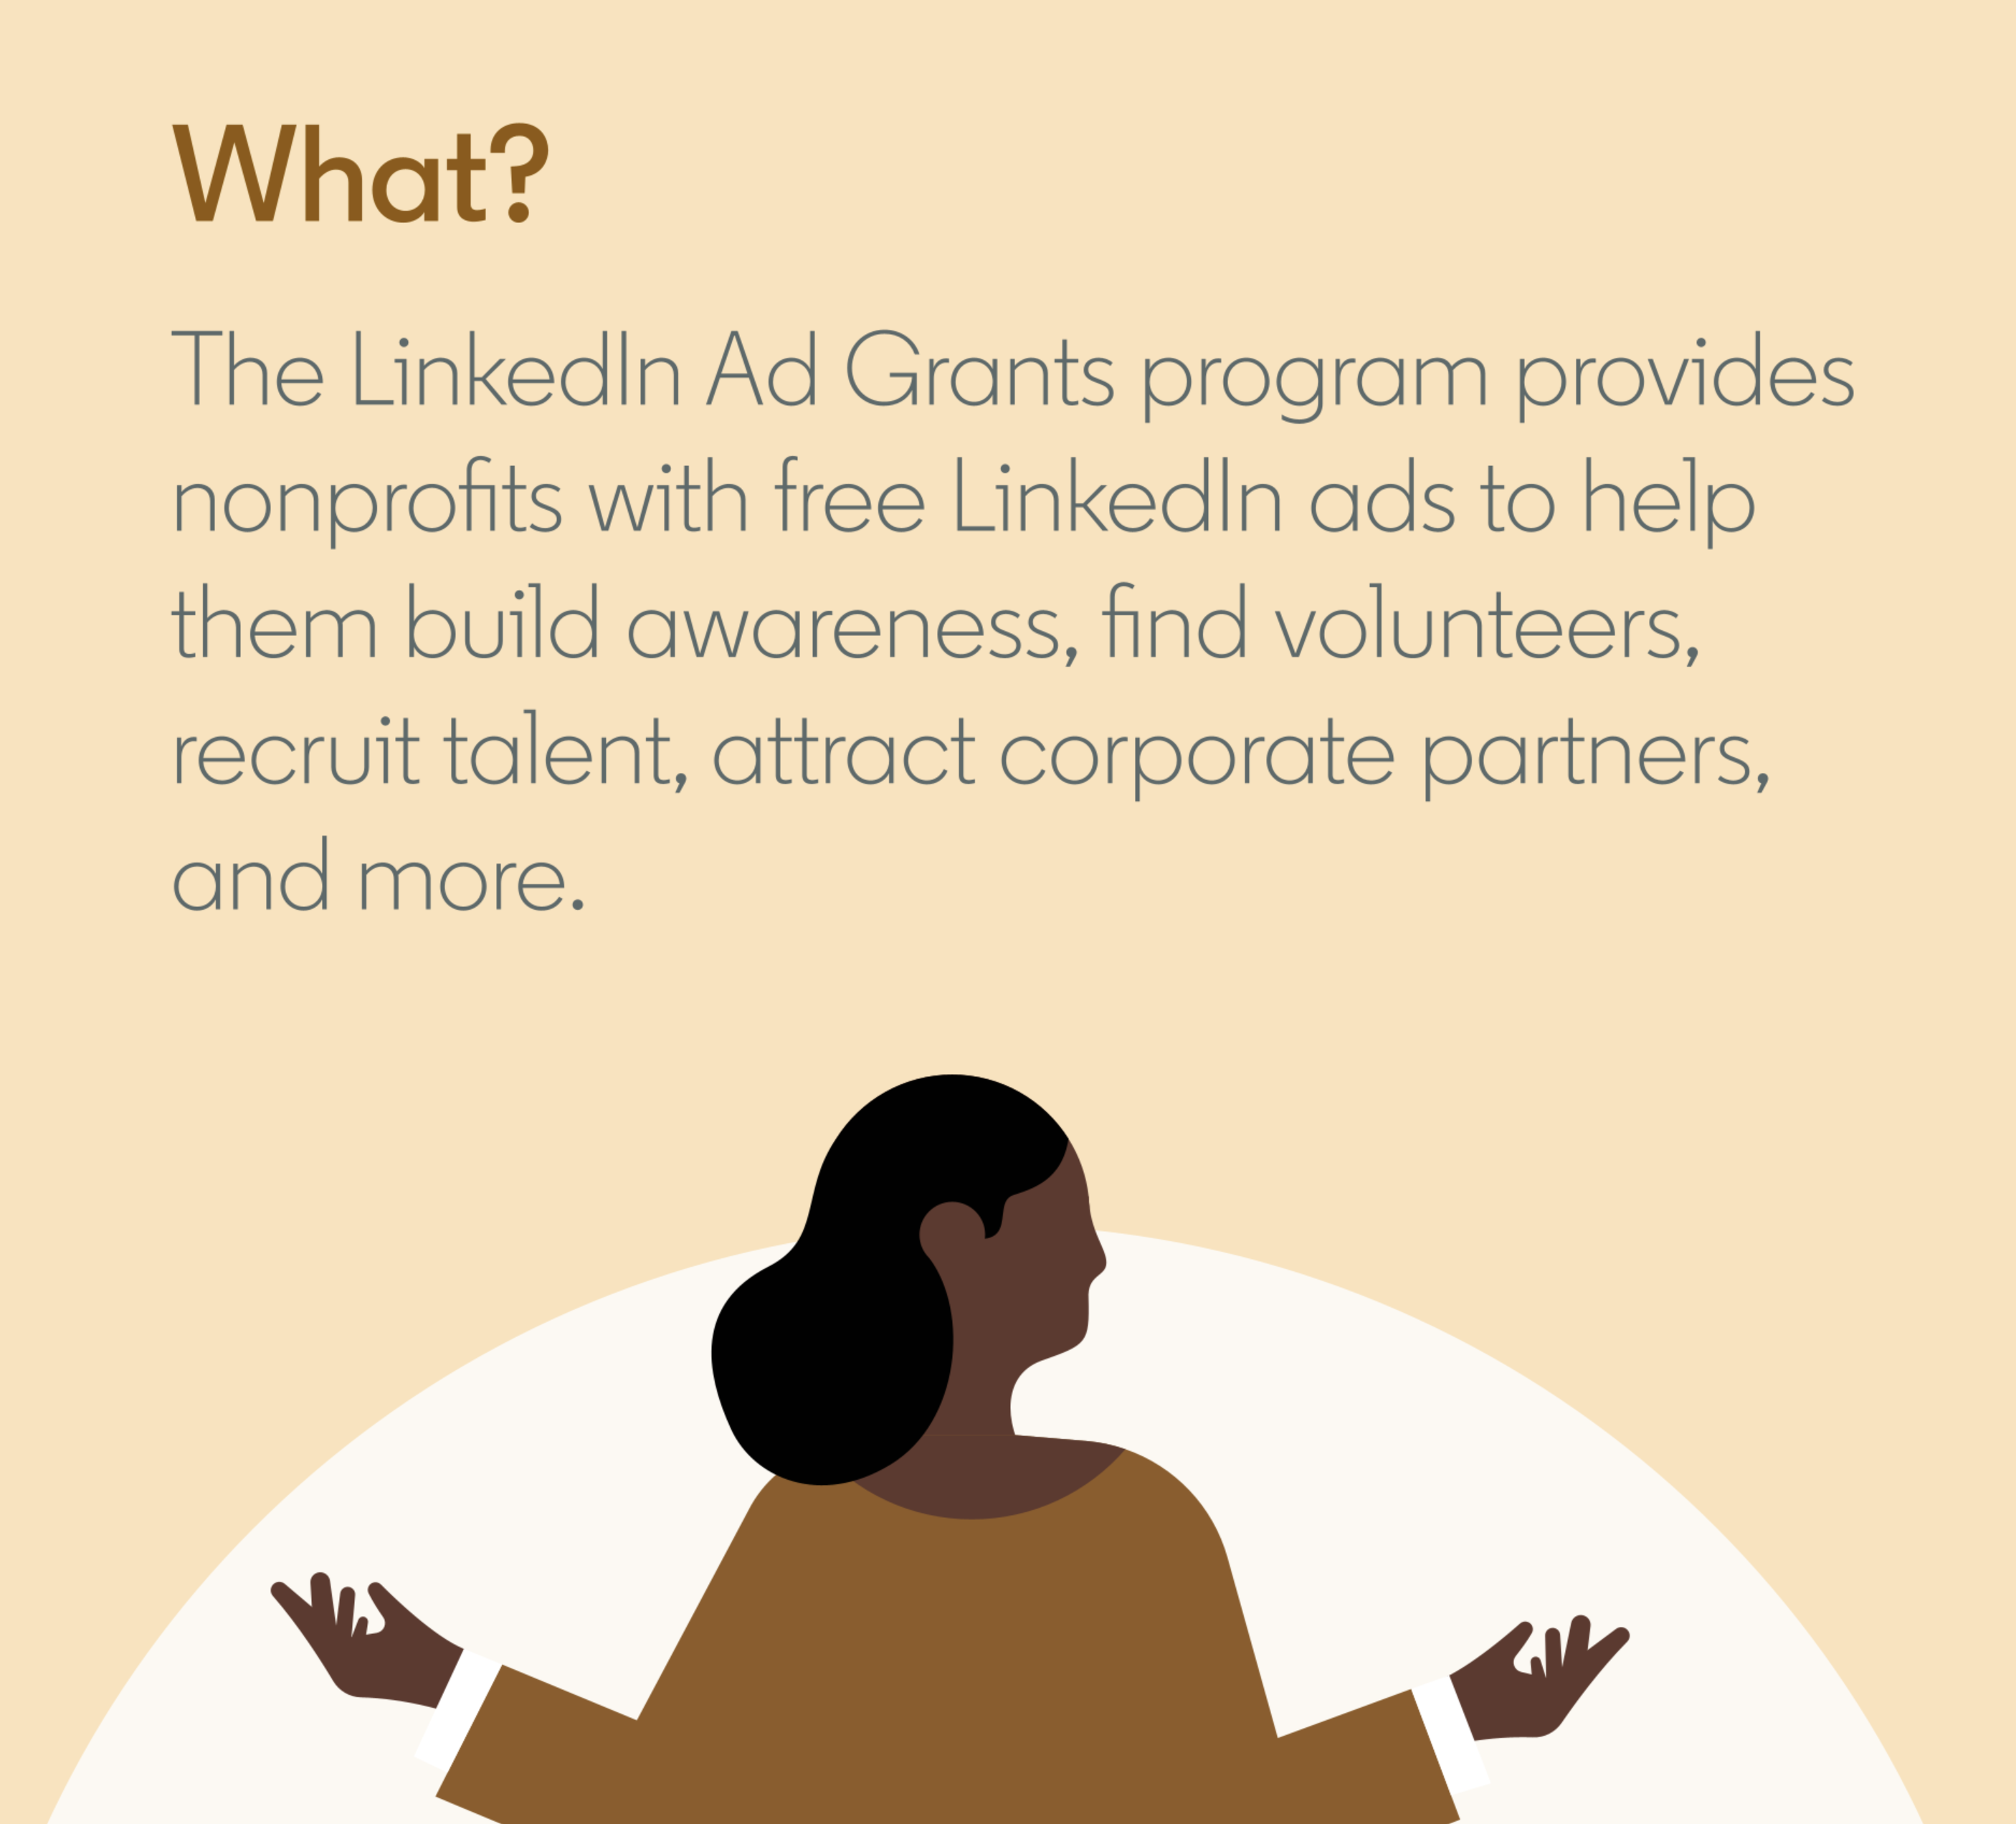 The LInkedIn Ad Grants program provides nonprofits with free LinkedIn ads to help them build awareness, find volunteers, recruit talent, attract corporate partners and more.